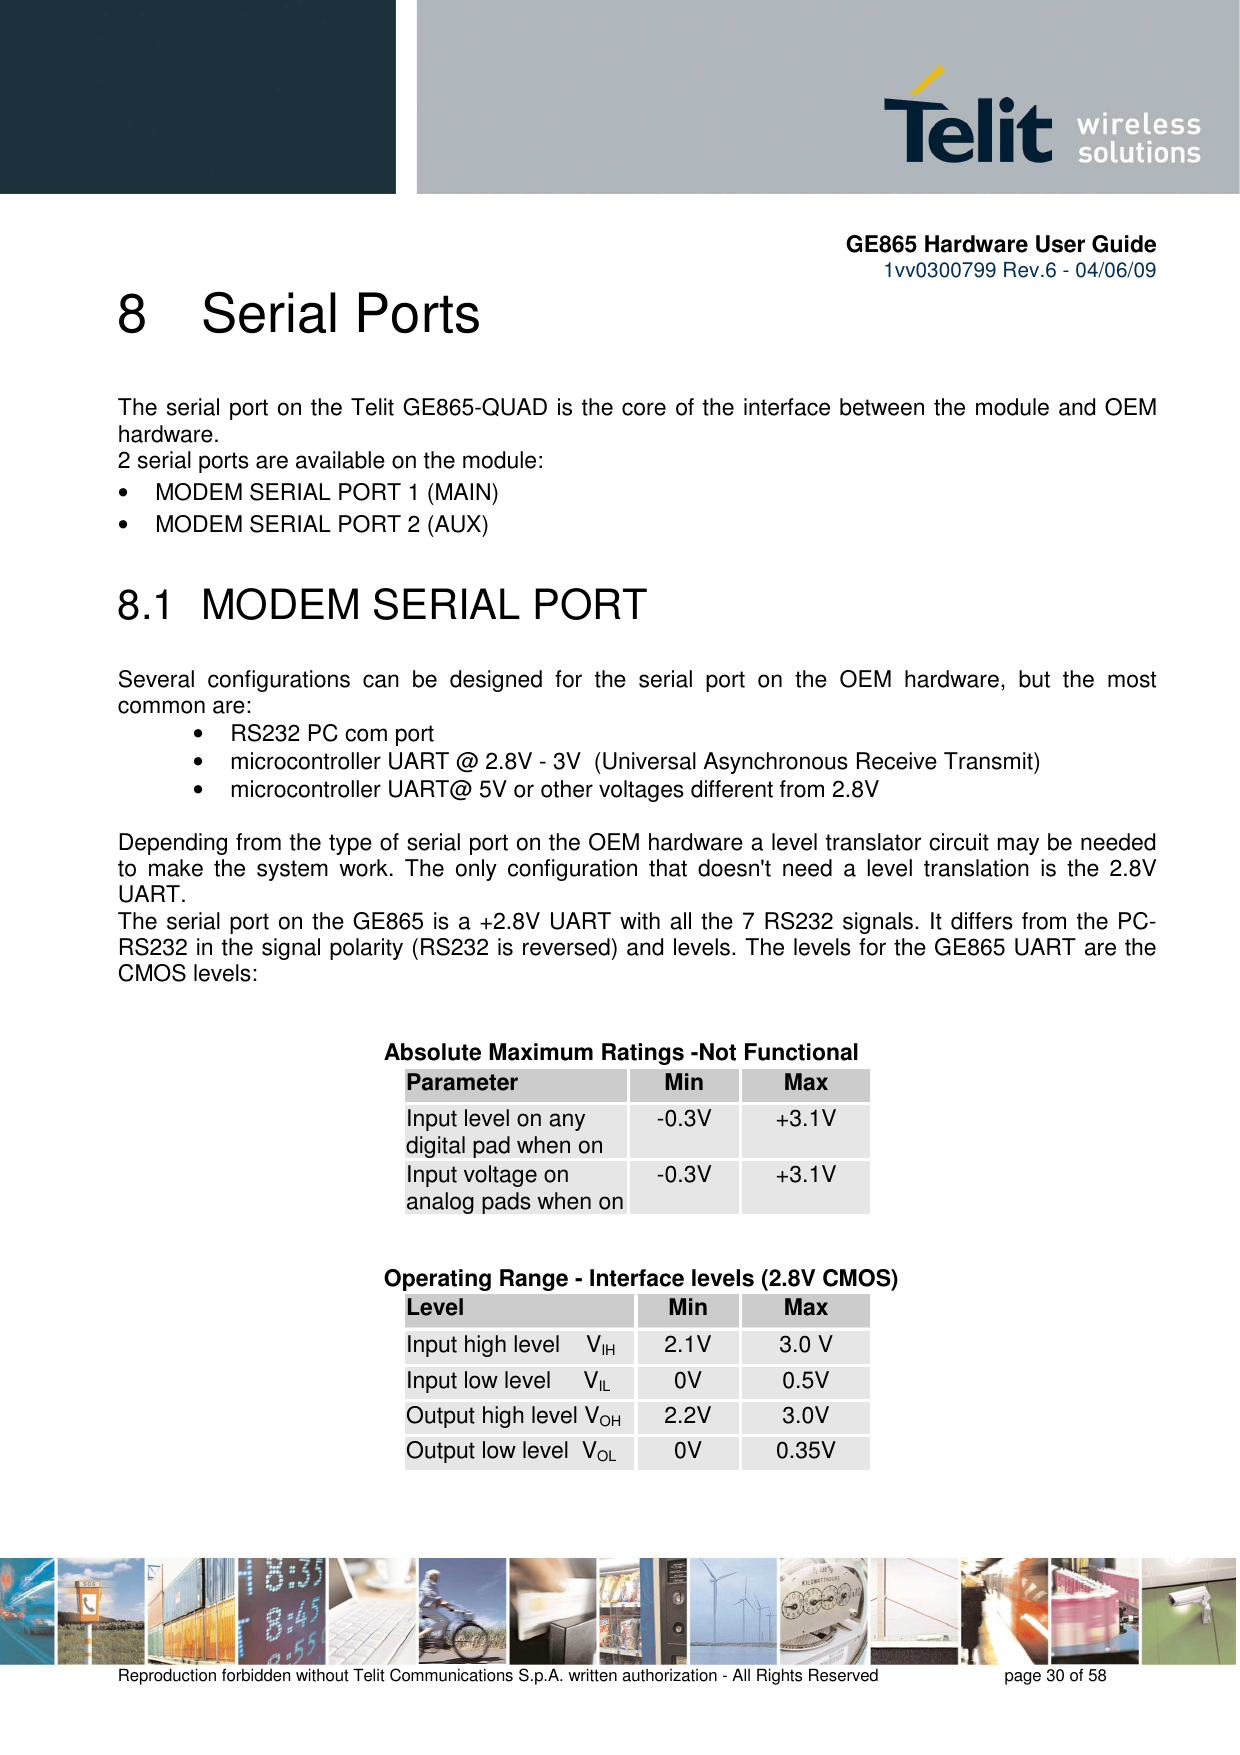       GE865 Hardware User Guide 1vv0300799 Rev.6 - 04/06/09      Reproduction forbidden without Telit Communications S.p.A. written authorization - All Rights Reserved    page 30 of 58  8  Serial Ports The serial port on the Telit GE865-QUAD is the core of the interface between the module and OEM hardware.  2 serial ports are available on the module: •  MODEM SERIAL PORT 1 (MAIN) •  MODEM SERIAL PORT 2 (AUX)  8.1  MODEM SERIAL PORT Several  configurations  can  be  designed  for  the  serial  port  on  the  OEM  hardware,  but  the  most common are: •  RS232 PC com port •  microcontroller UART @ 2.8V - 3V  (Universal Asynchronous Receive Transmit)  •  microcontroller UART@ 5V or other voltages different from 2.8V   Depending from the type of serial port on the OEM hardware a level translator circuit may be needed to  make  the  system  work.  The  only  configuration  that  doesn&apos;t  need  a  level  translation  is  the  2.8V UART. The serial port on the GE865 is a +2.8V UART with all the 7 RS232 signals. It differs from the PC-RS232 in the signal polarity (RS232 is reversed) and levels. The levels for the GE865 UART are the CMOS levels:   Absolute Maximum Ratings -Not Functional Parameter Min Max Input level on any digital pad when on  -0.3V  +3.1V Input voltage on analog pads when on -0.3V  +3.1V         Operating Range - Interface levels (2.8V CMOS) Level Min Max Input high level    VIH 2.1V  3.0 V Input low level     VIL  0V  0.5V Output high level VOH  2.2V  3.0V Output low level  VOL  0V  0.35V   